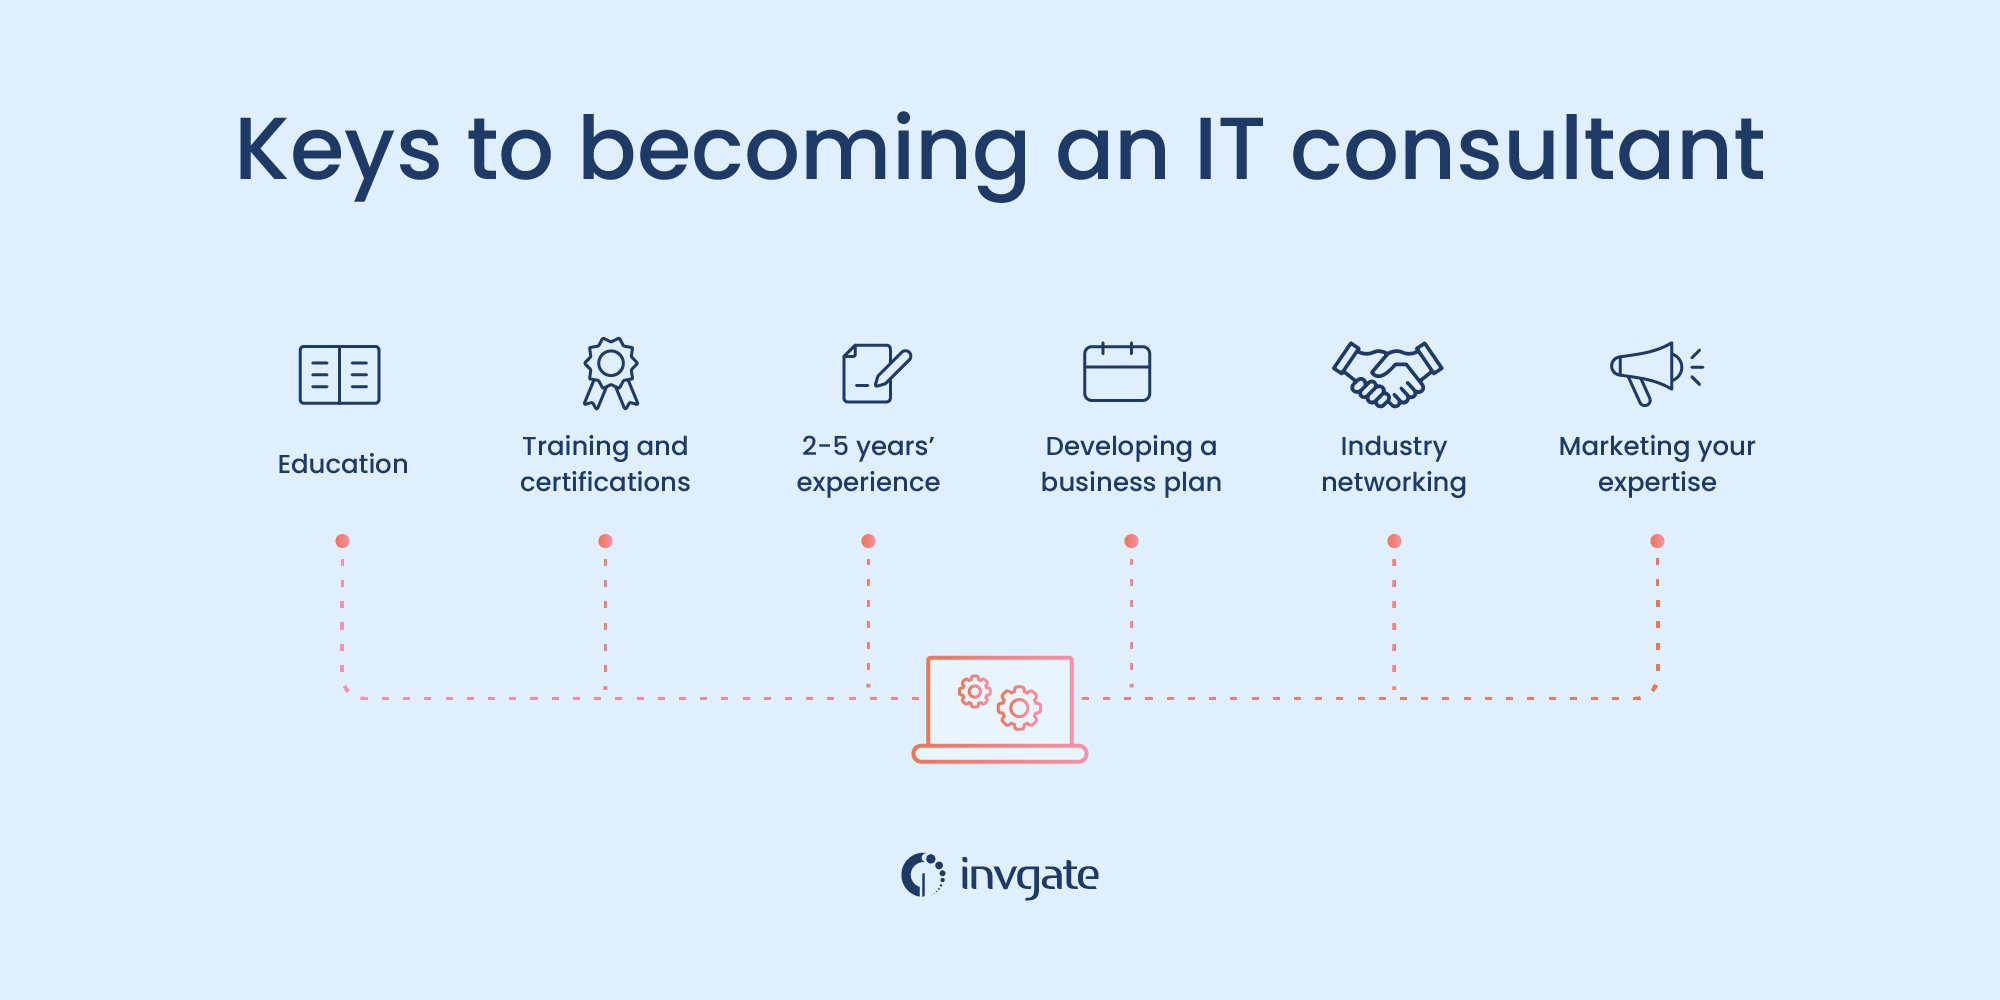 The keys to becoming an IT consultant.